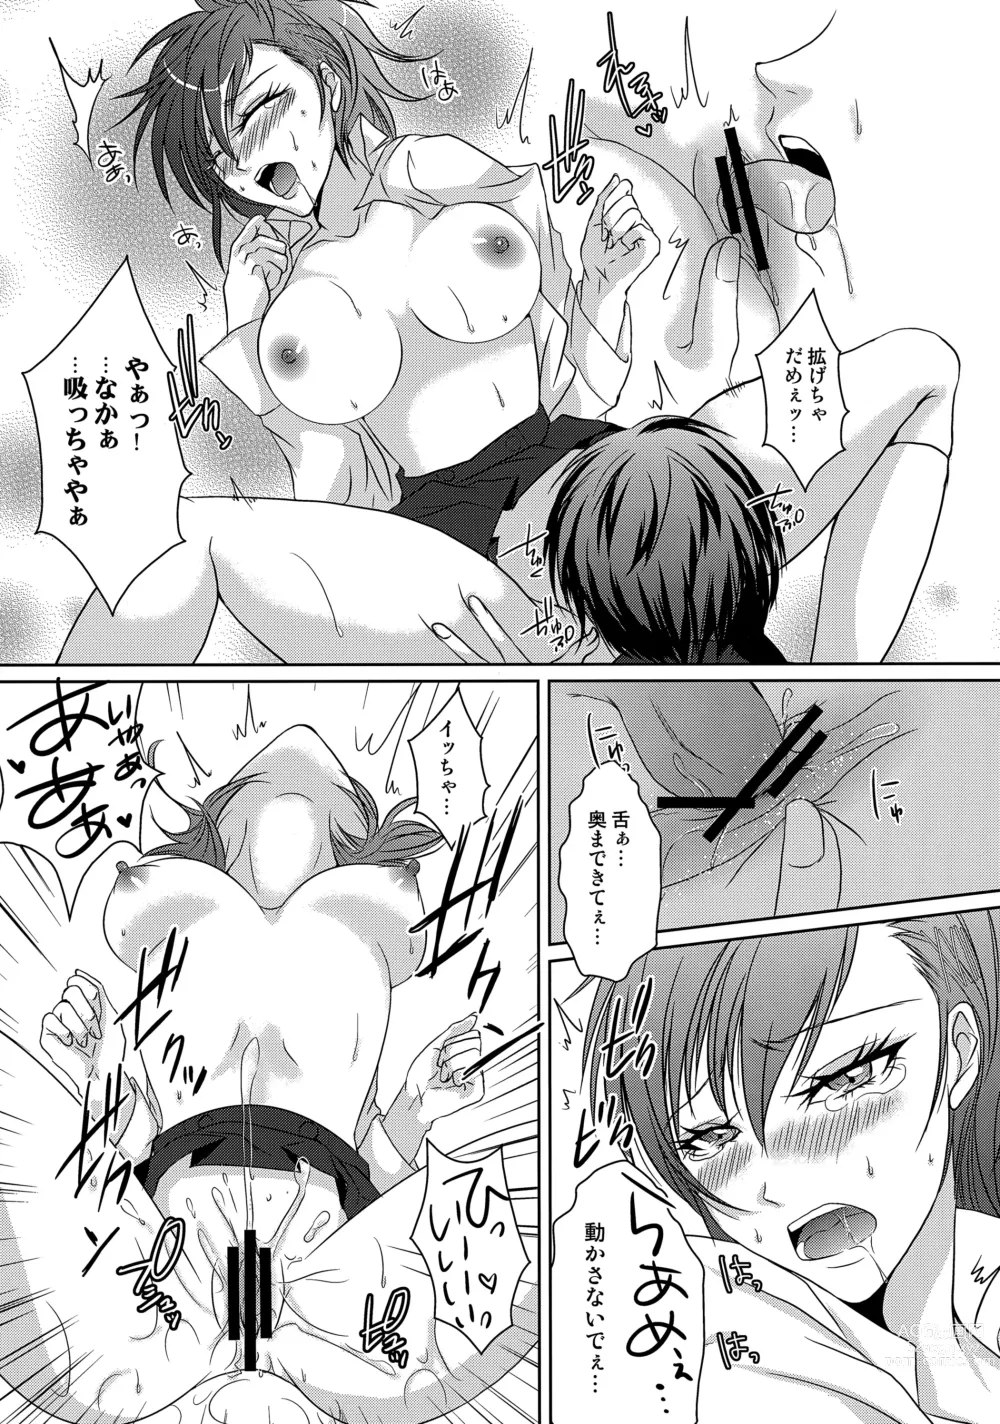 Page 10 of doujinshi Repeatedly